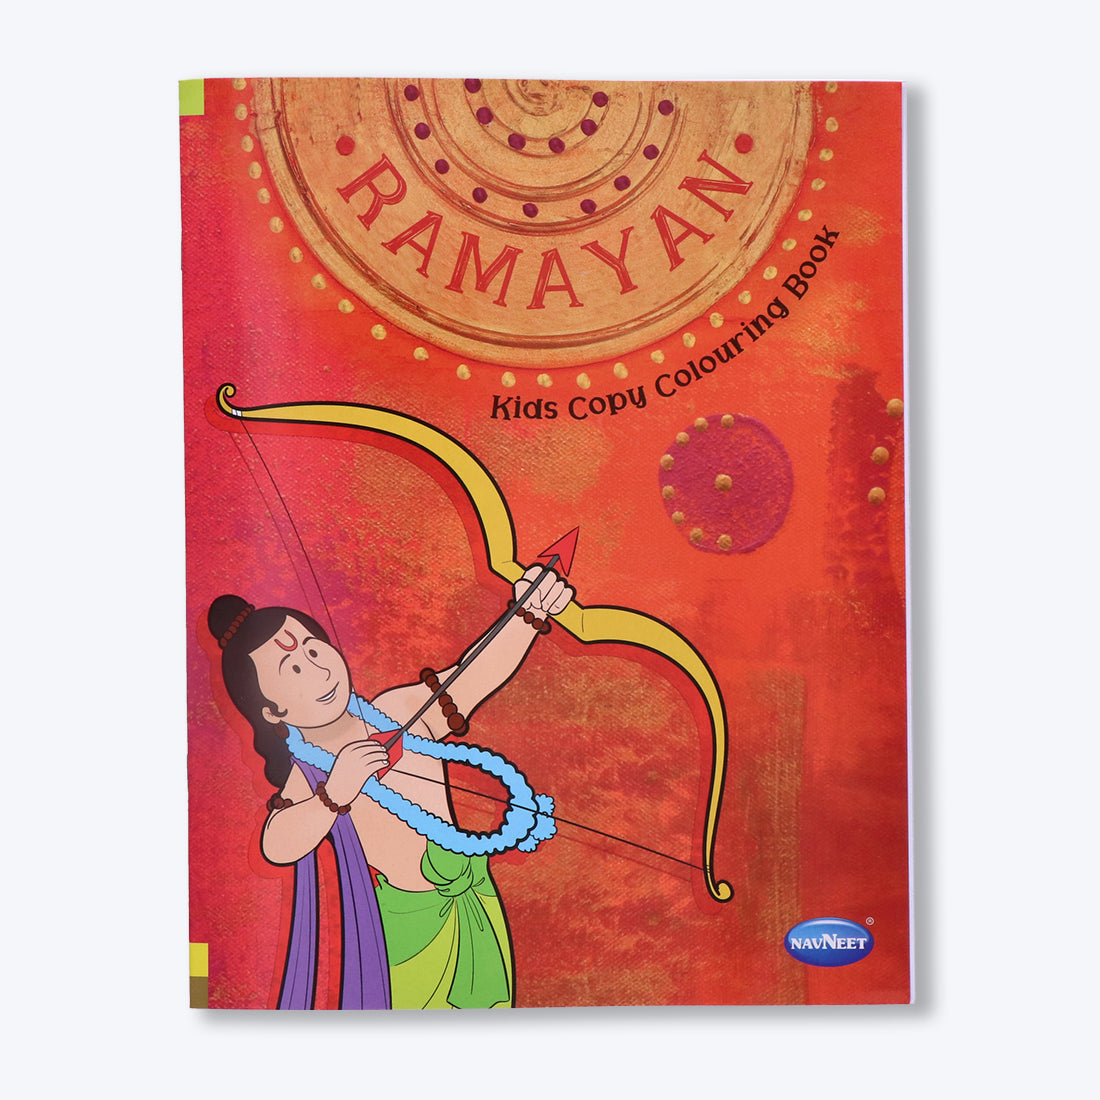 Navneet Ramanya Kids Copy Colouring Painting and colouring books for kids - Youva Crayons